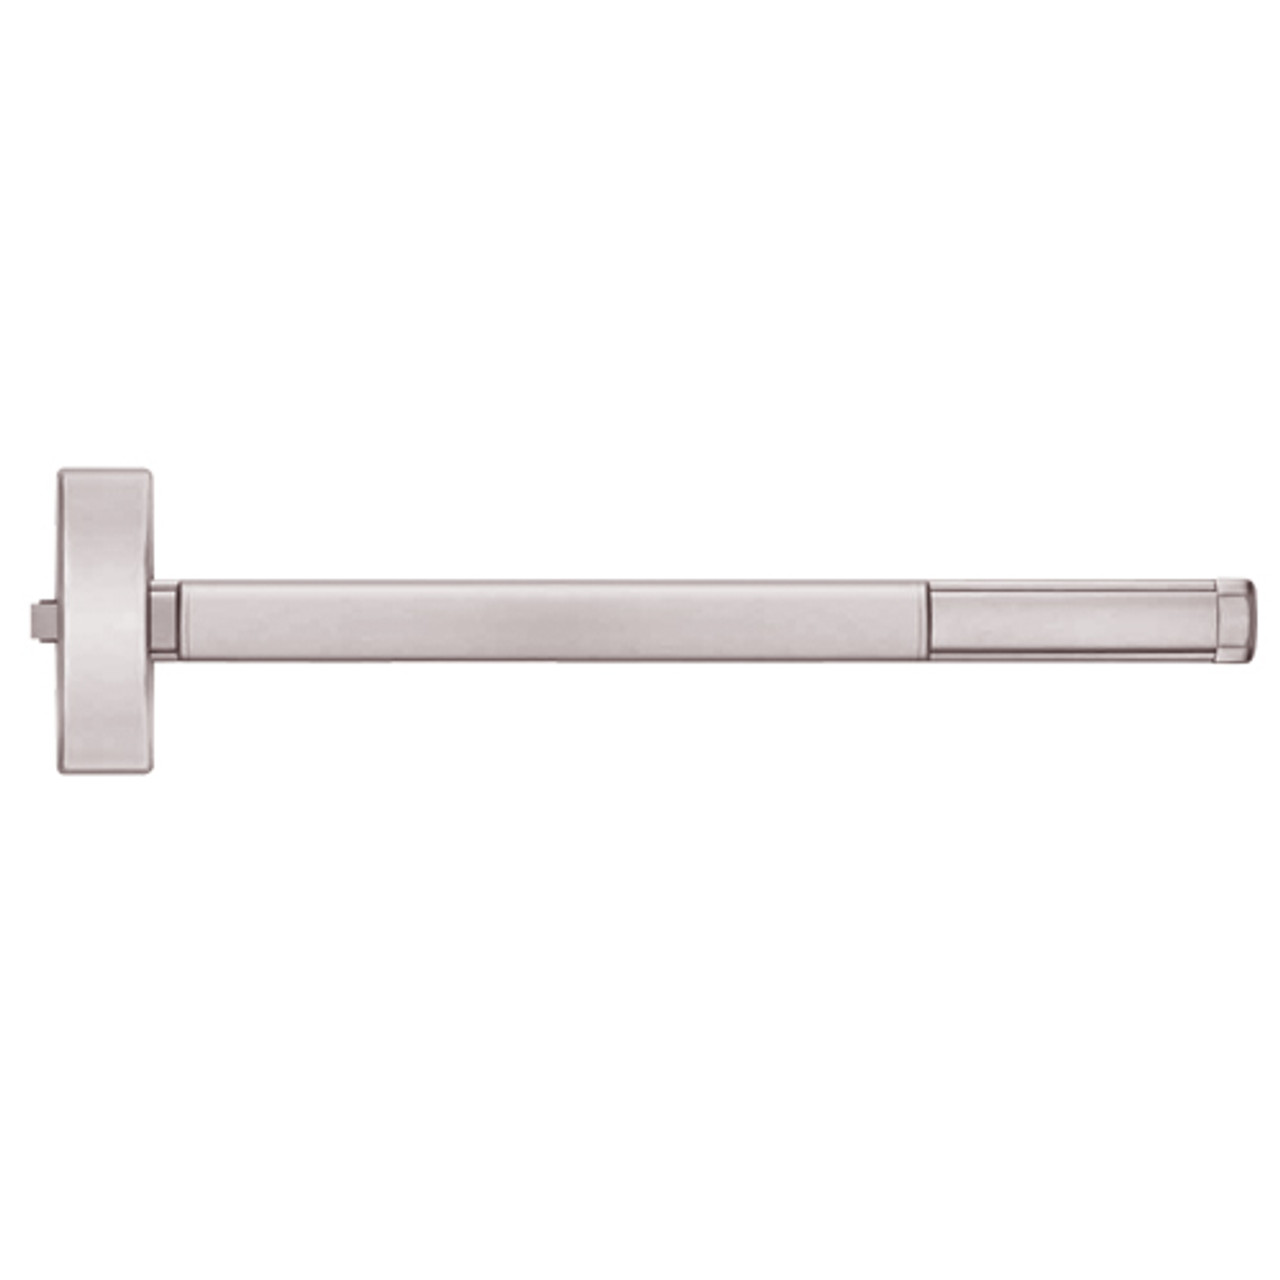 MLRFL2105-628-48 PHI 2100 Series Fire Rated Apex Rim Exit Device with Motorized Latch Retraction Prepped for Key Controls Thumb Piece in Satin Aluminum Finish